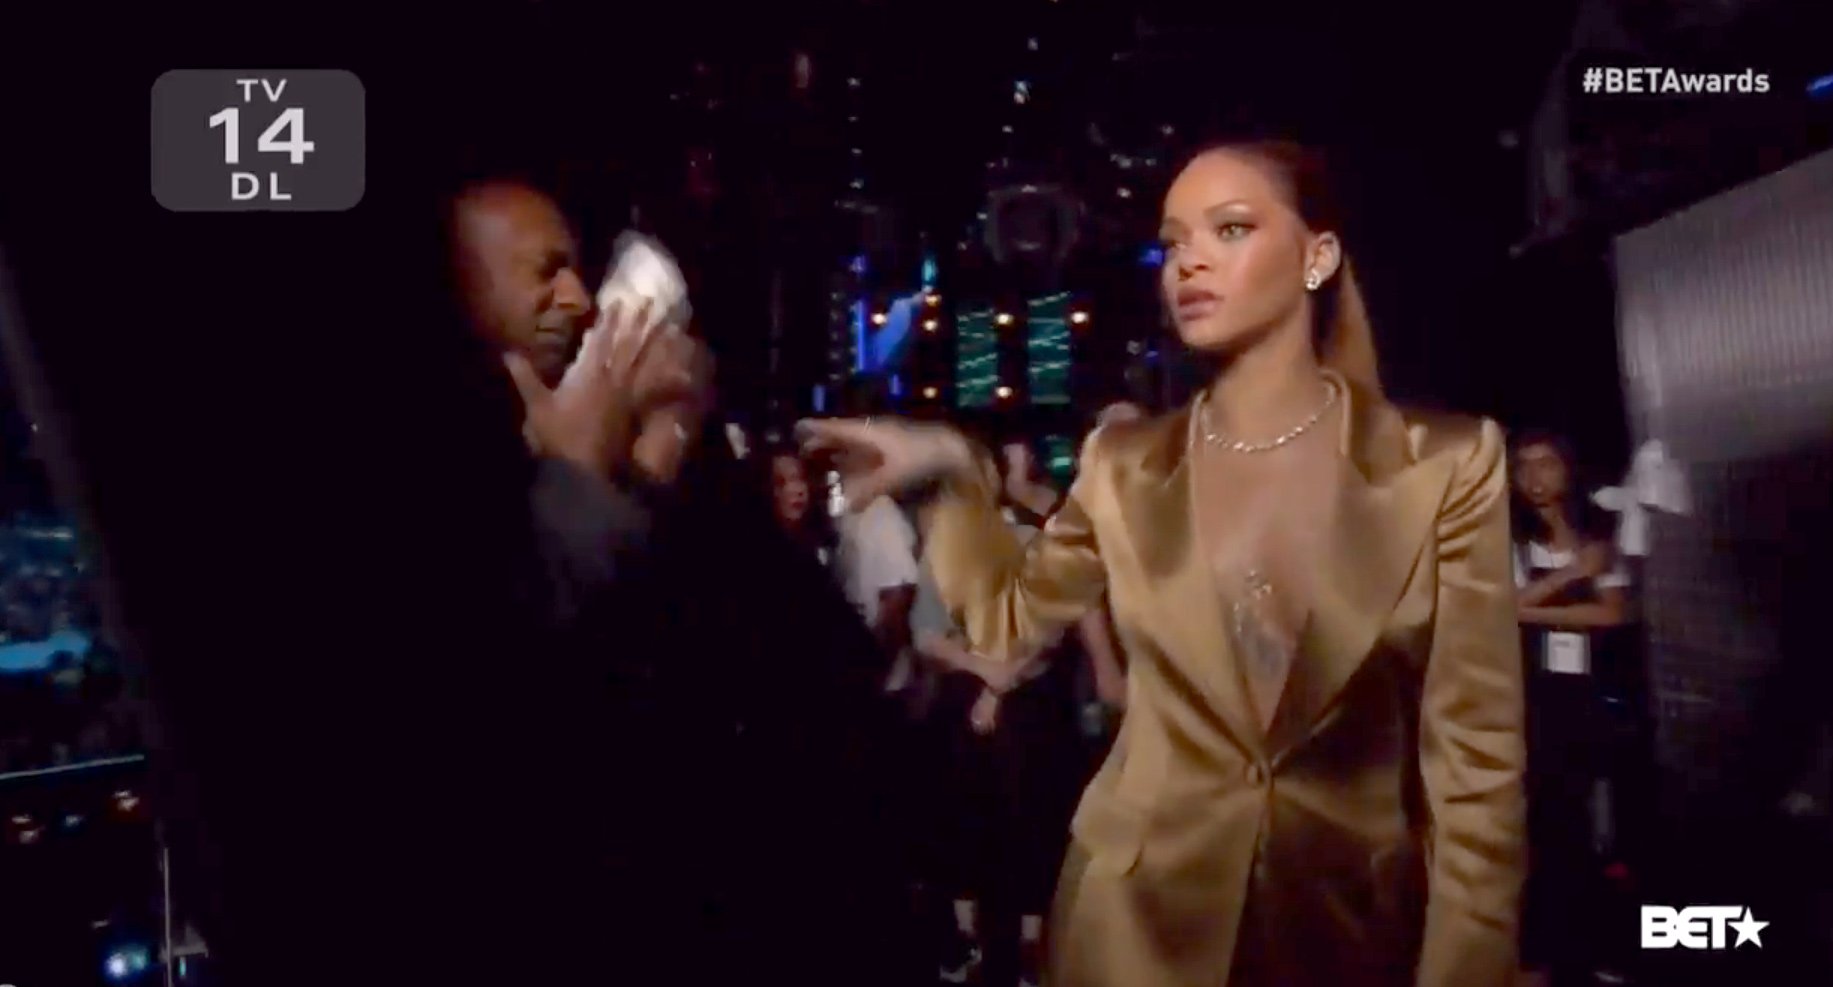 Rihanna Throws Cash At Exec In Staged Bet Awards Moment 2015 Bet